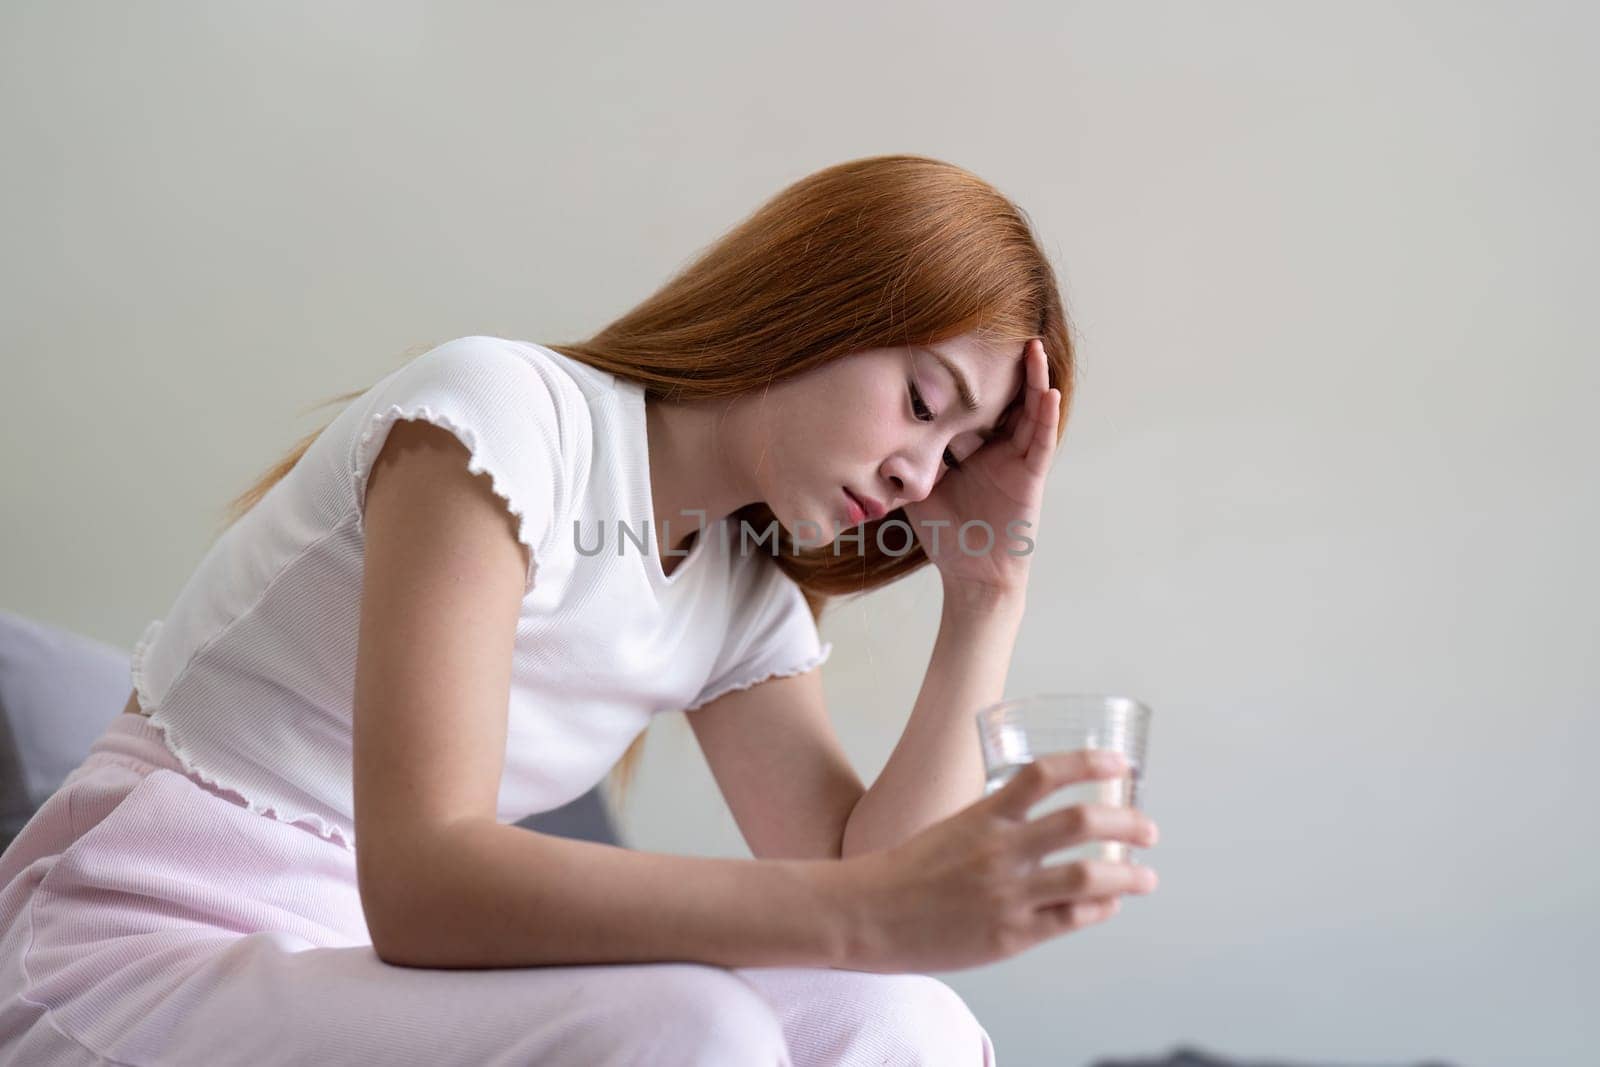 A young woman with a headache, holding a glass of water, sitting in a minimalist home environment, conveying discomfort and pain.